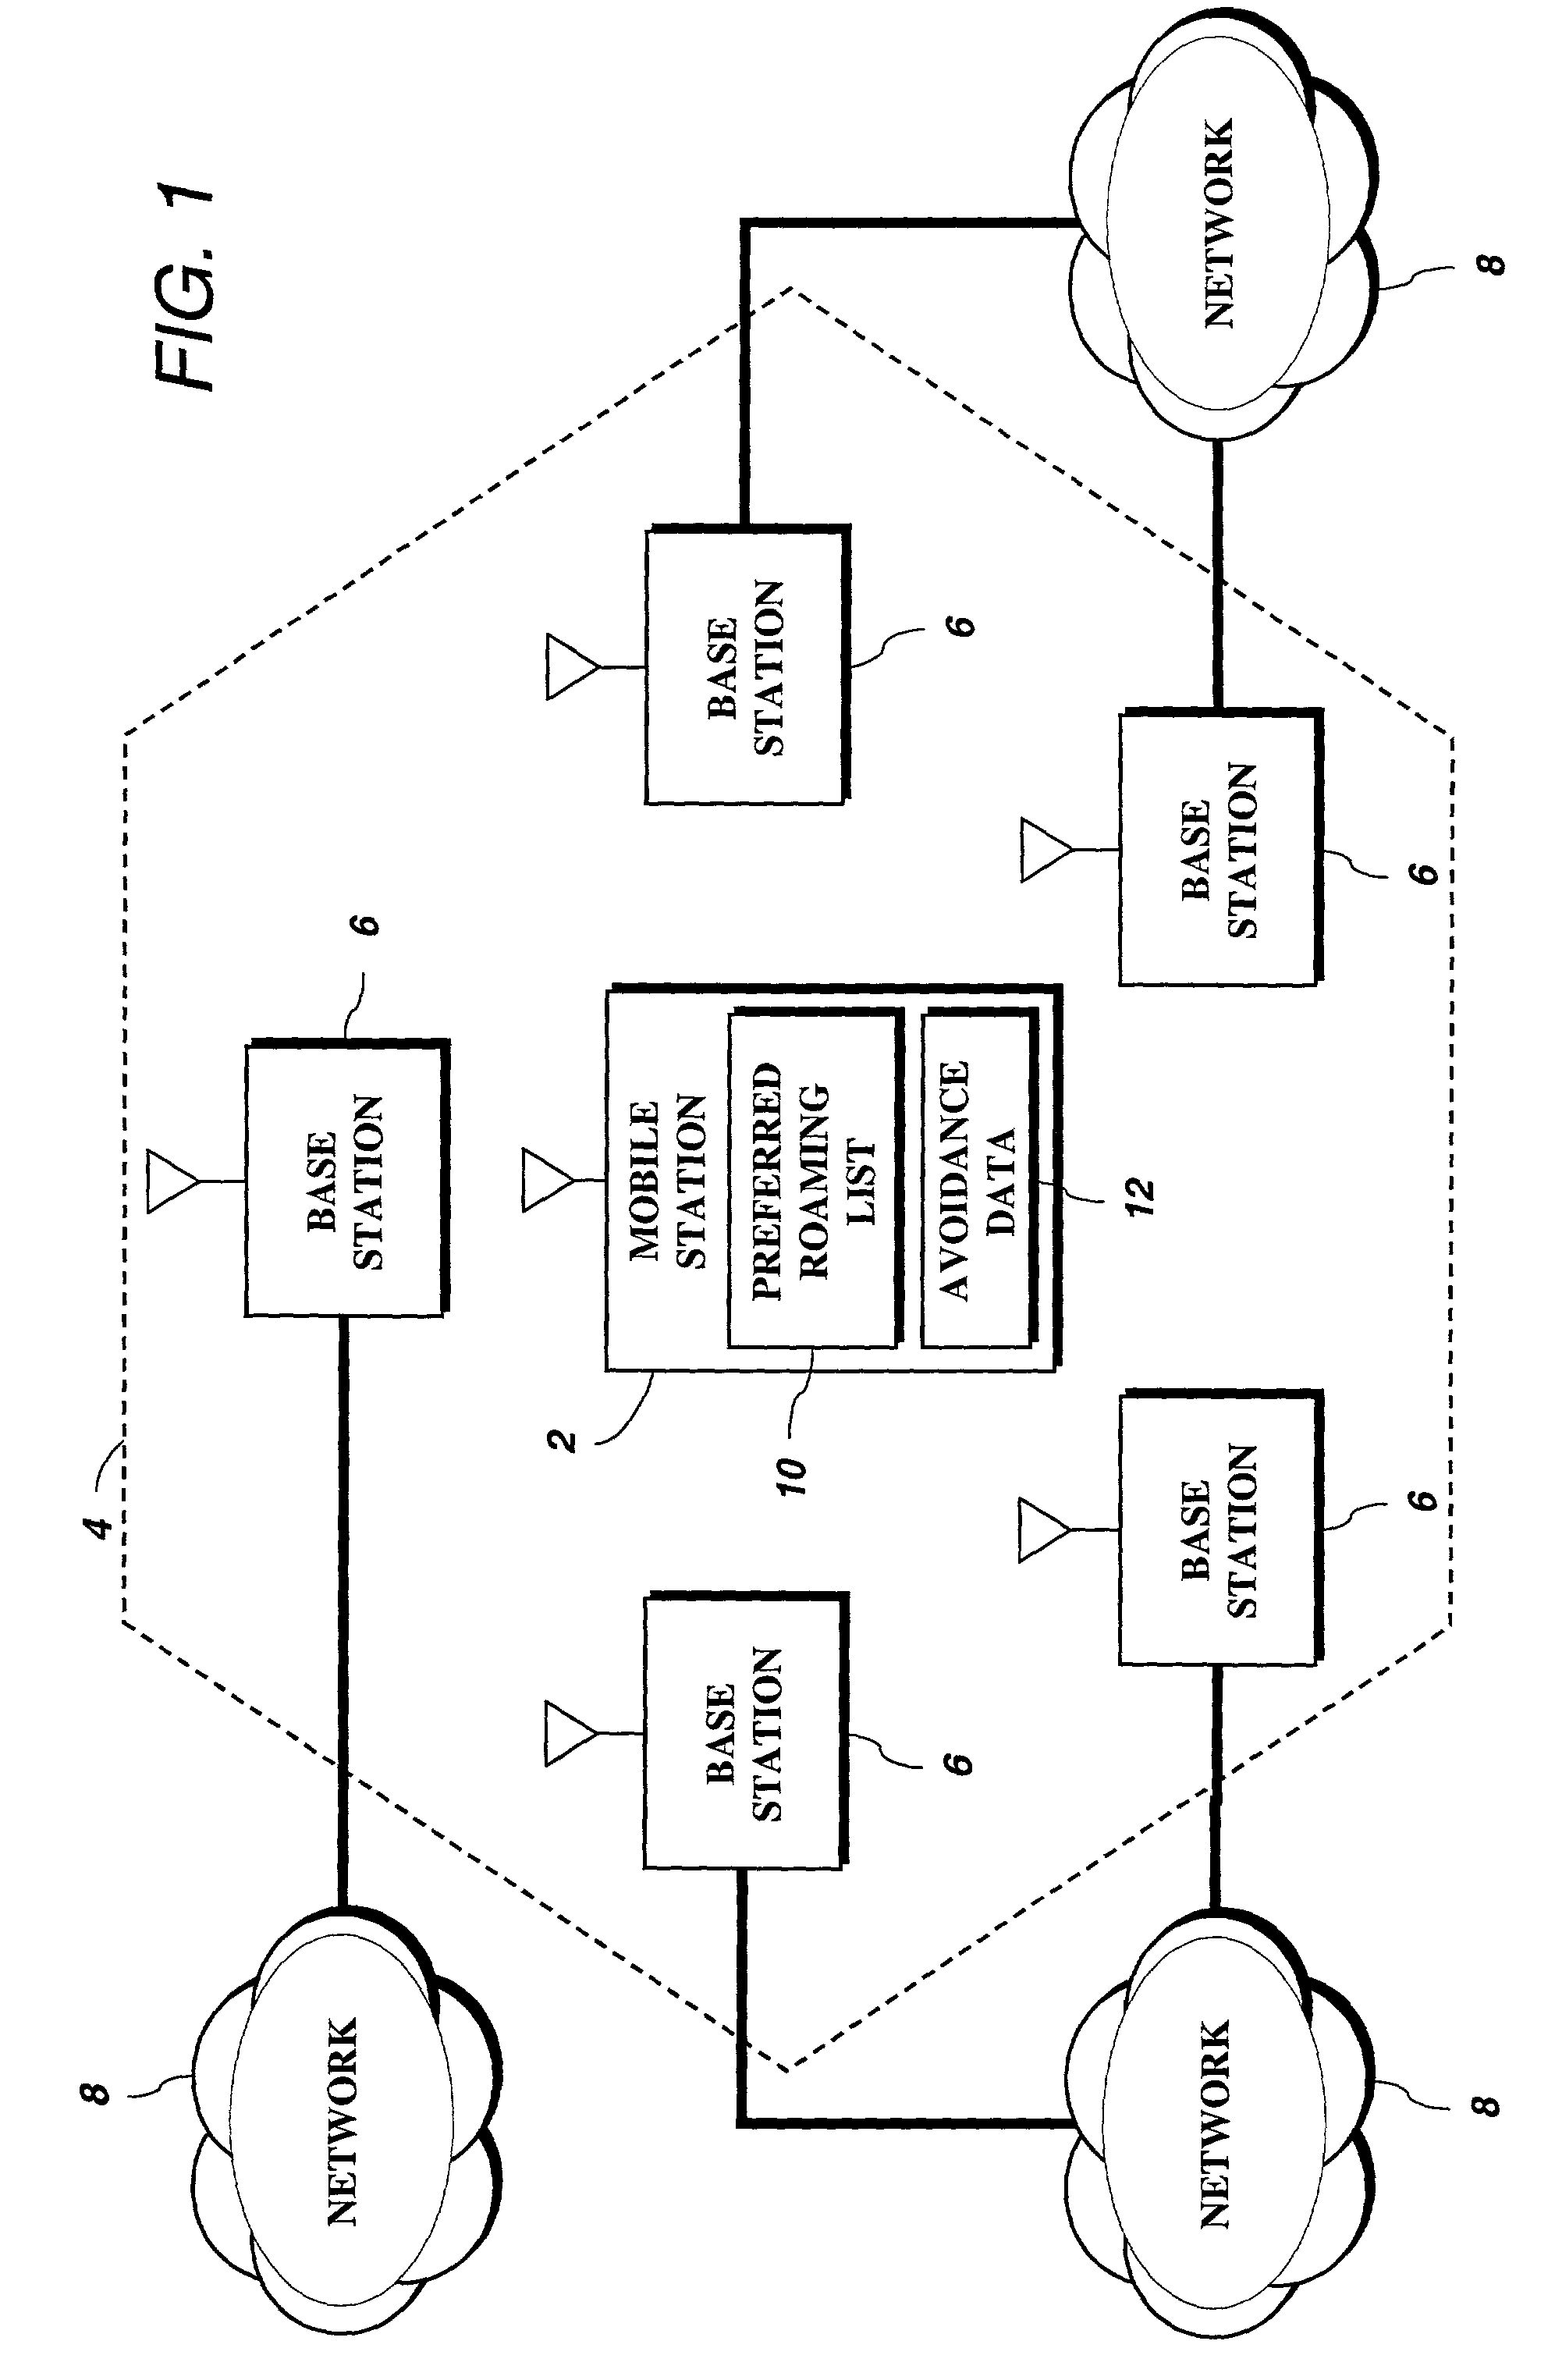 Method and apparatus for efficient selection and acquisition of a wireless communications system